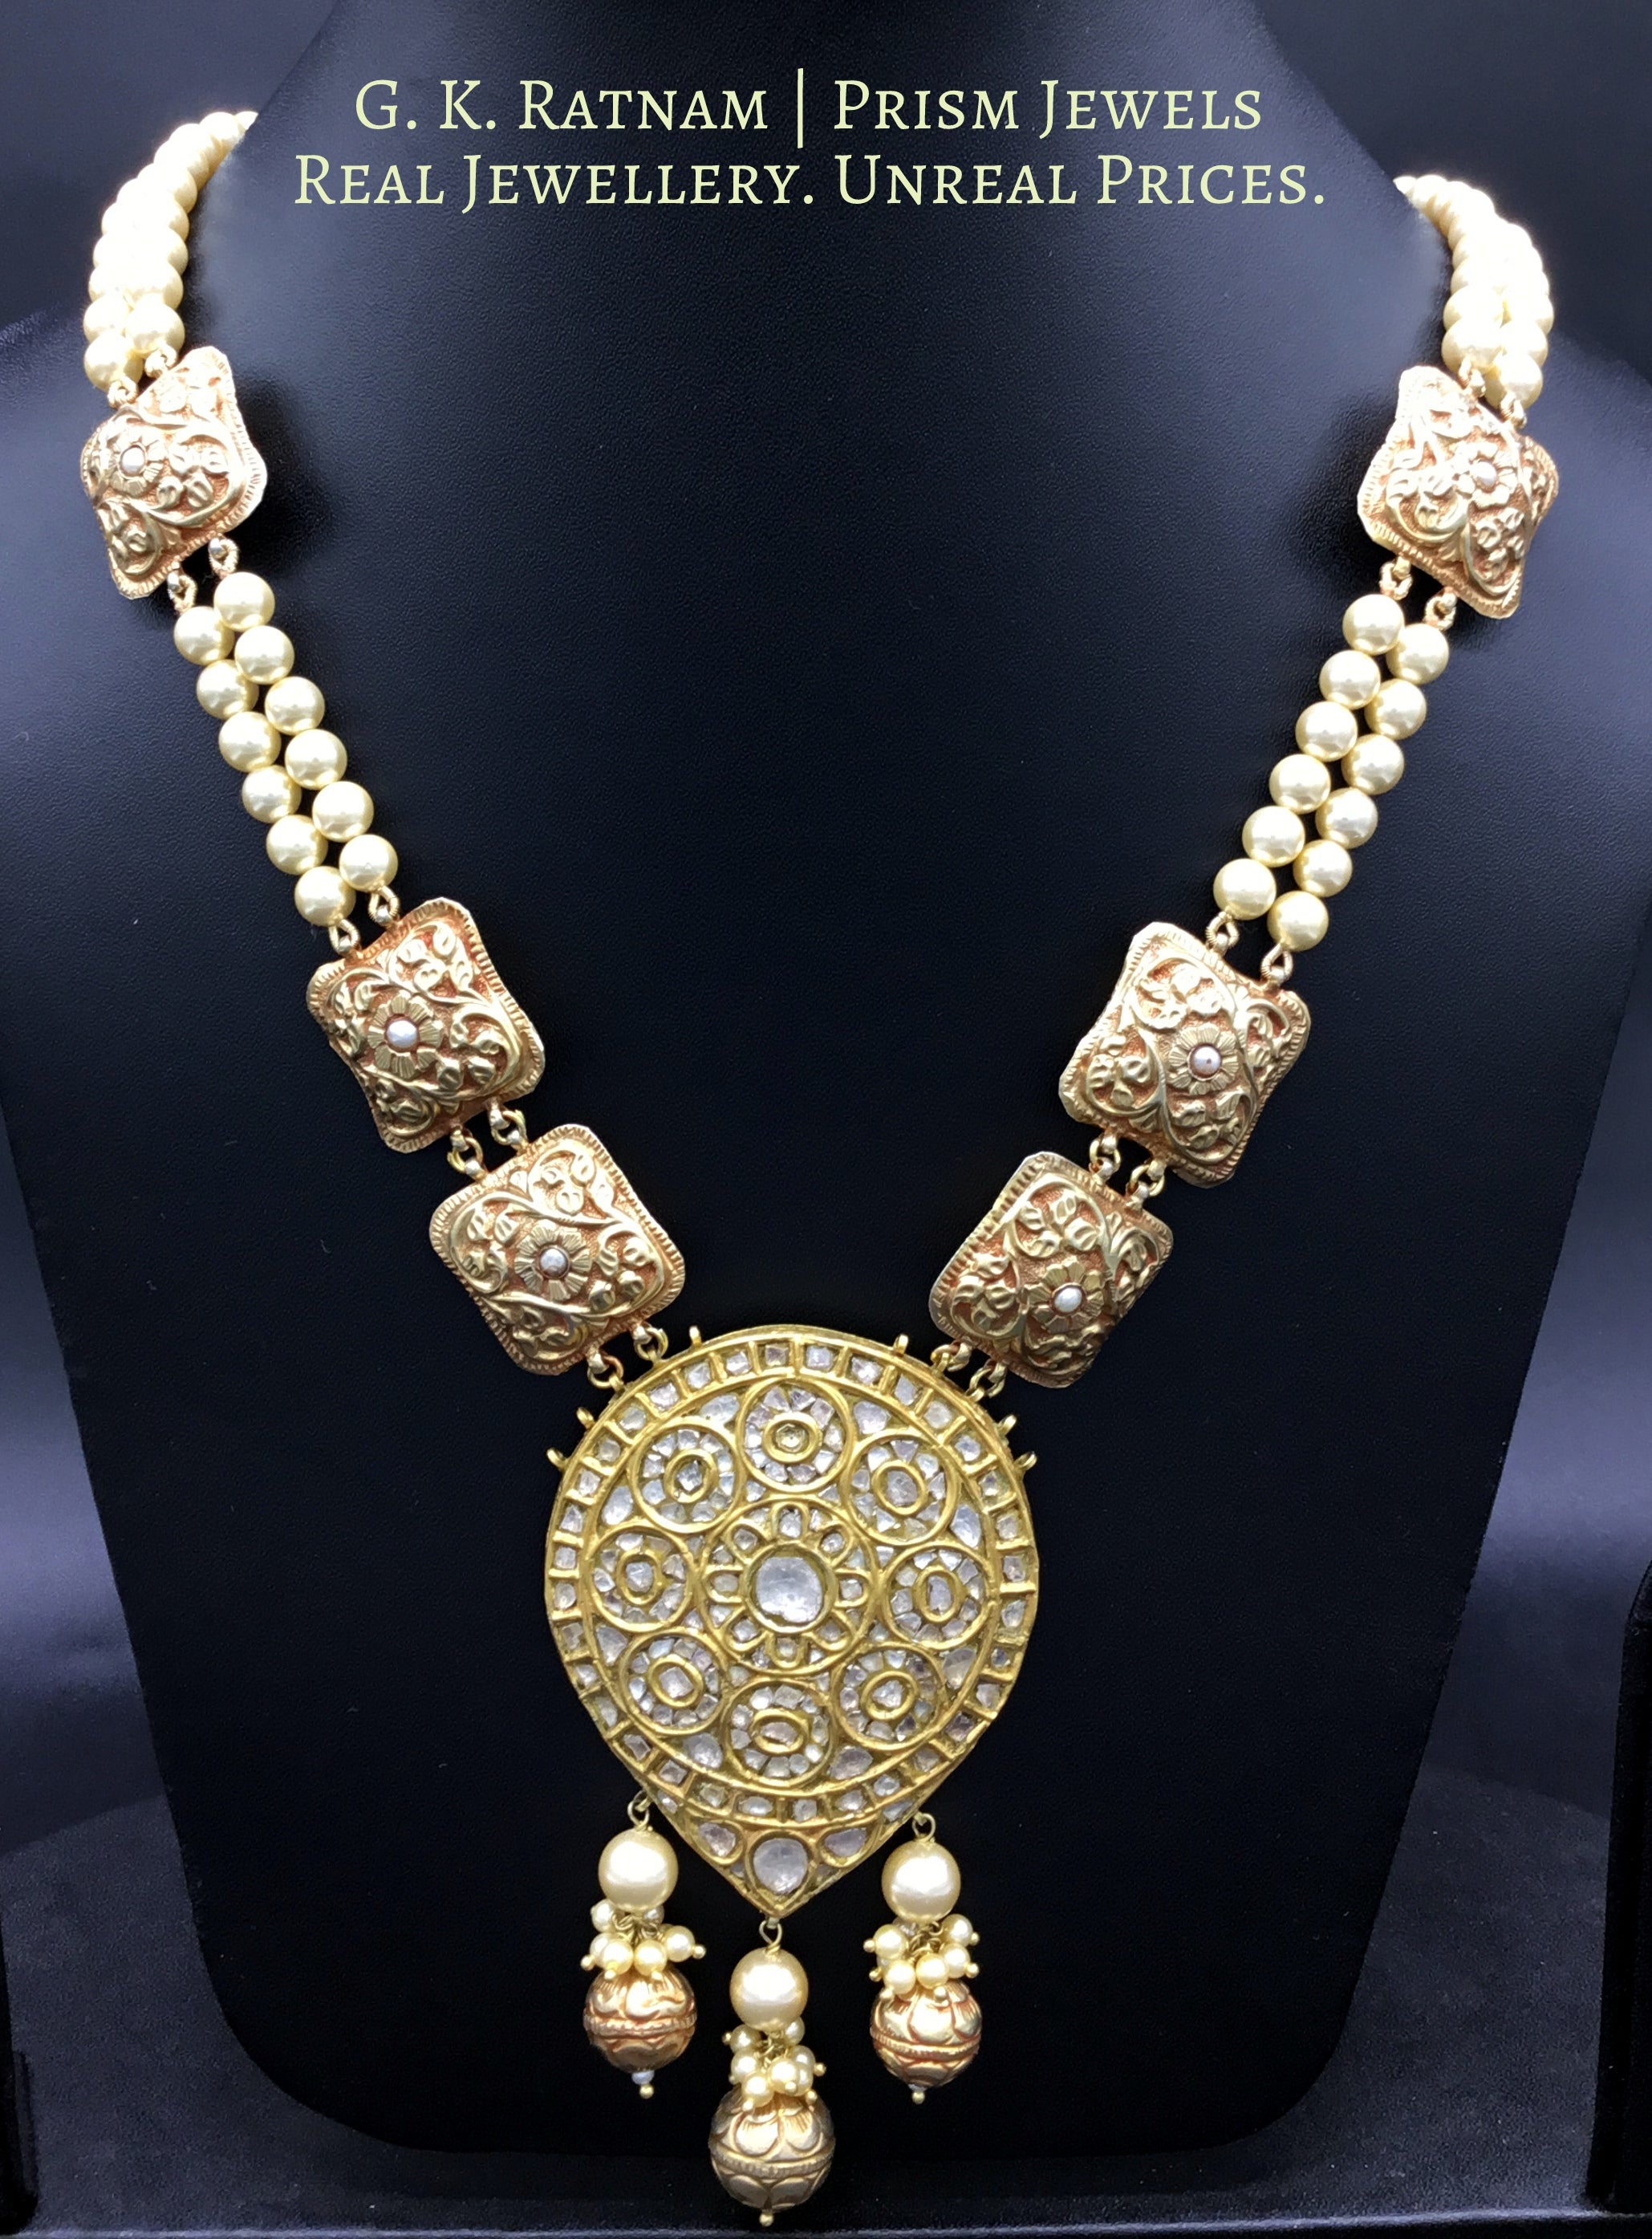 18k Gold and Diamond Polki pear-shaped Pendant strung with pearls and hand-carved golden elements - G. K. Ratnam